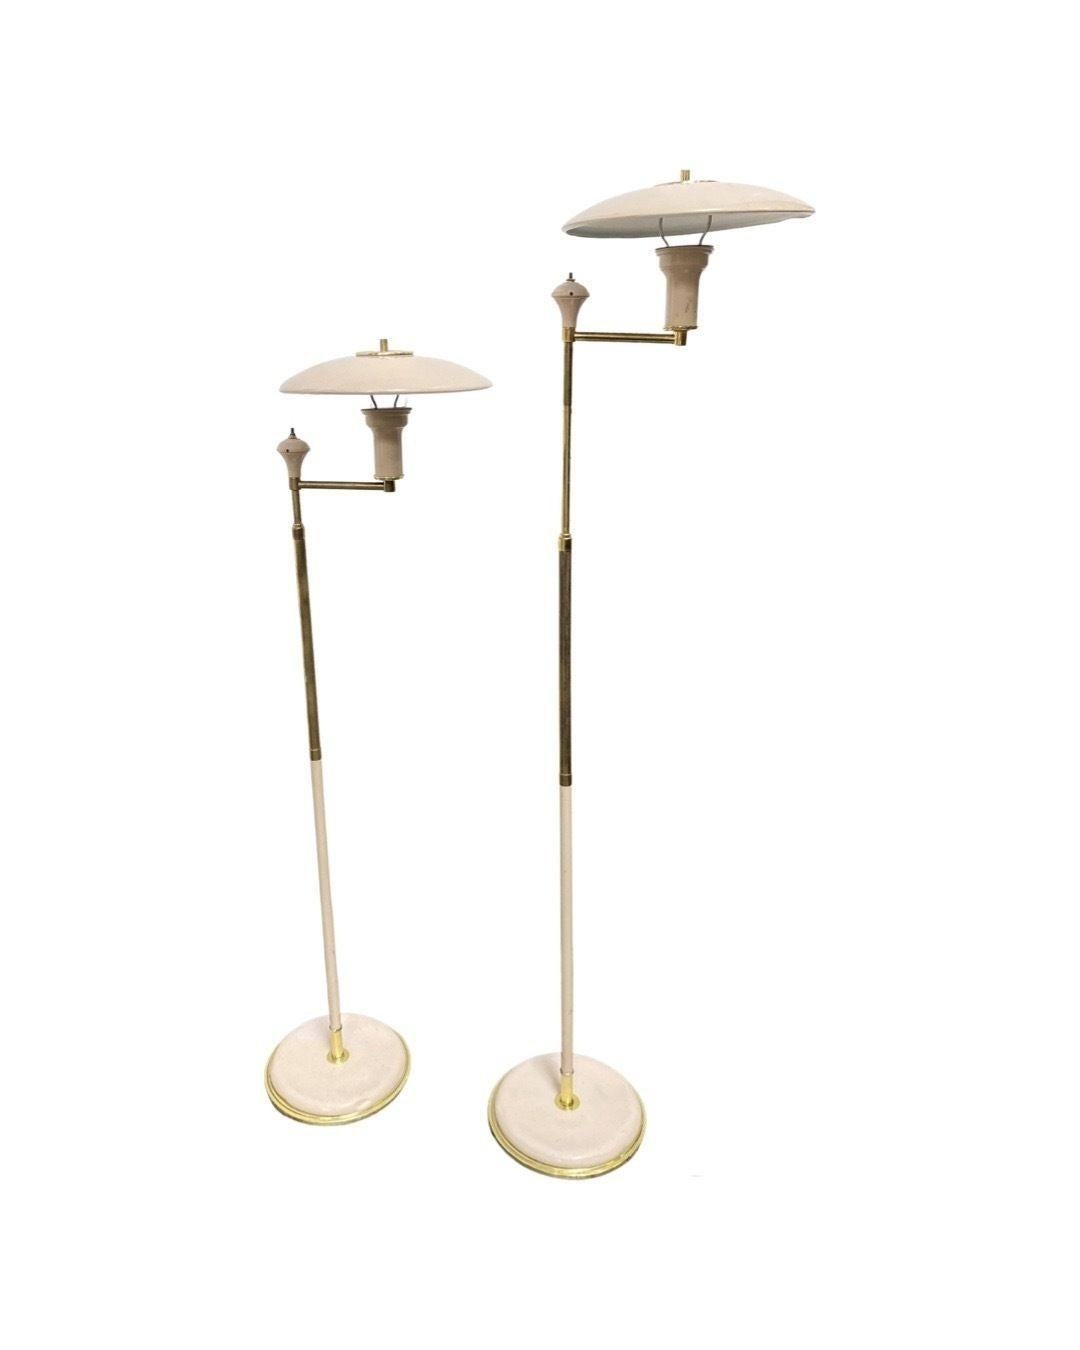 North American Art Deco Dazor Swing Arm 1950's Mid Century Flying Saucer Floor, Pair For Sale